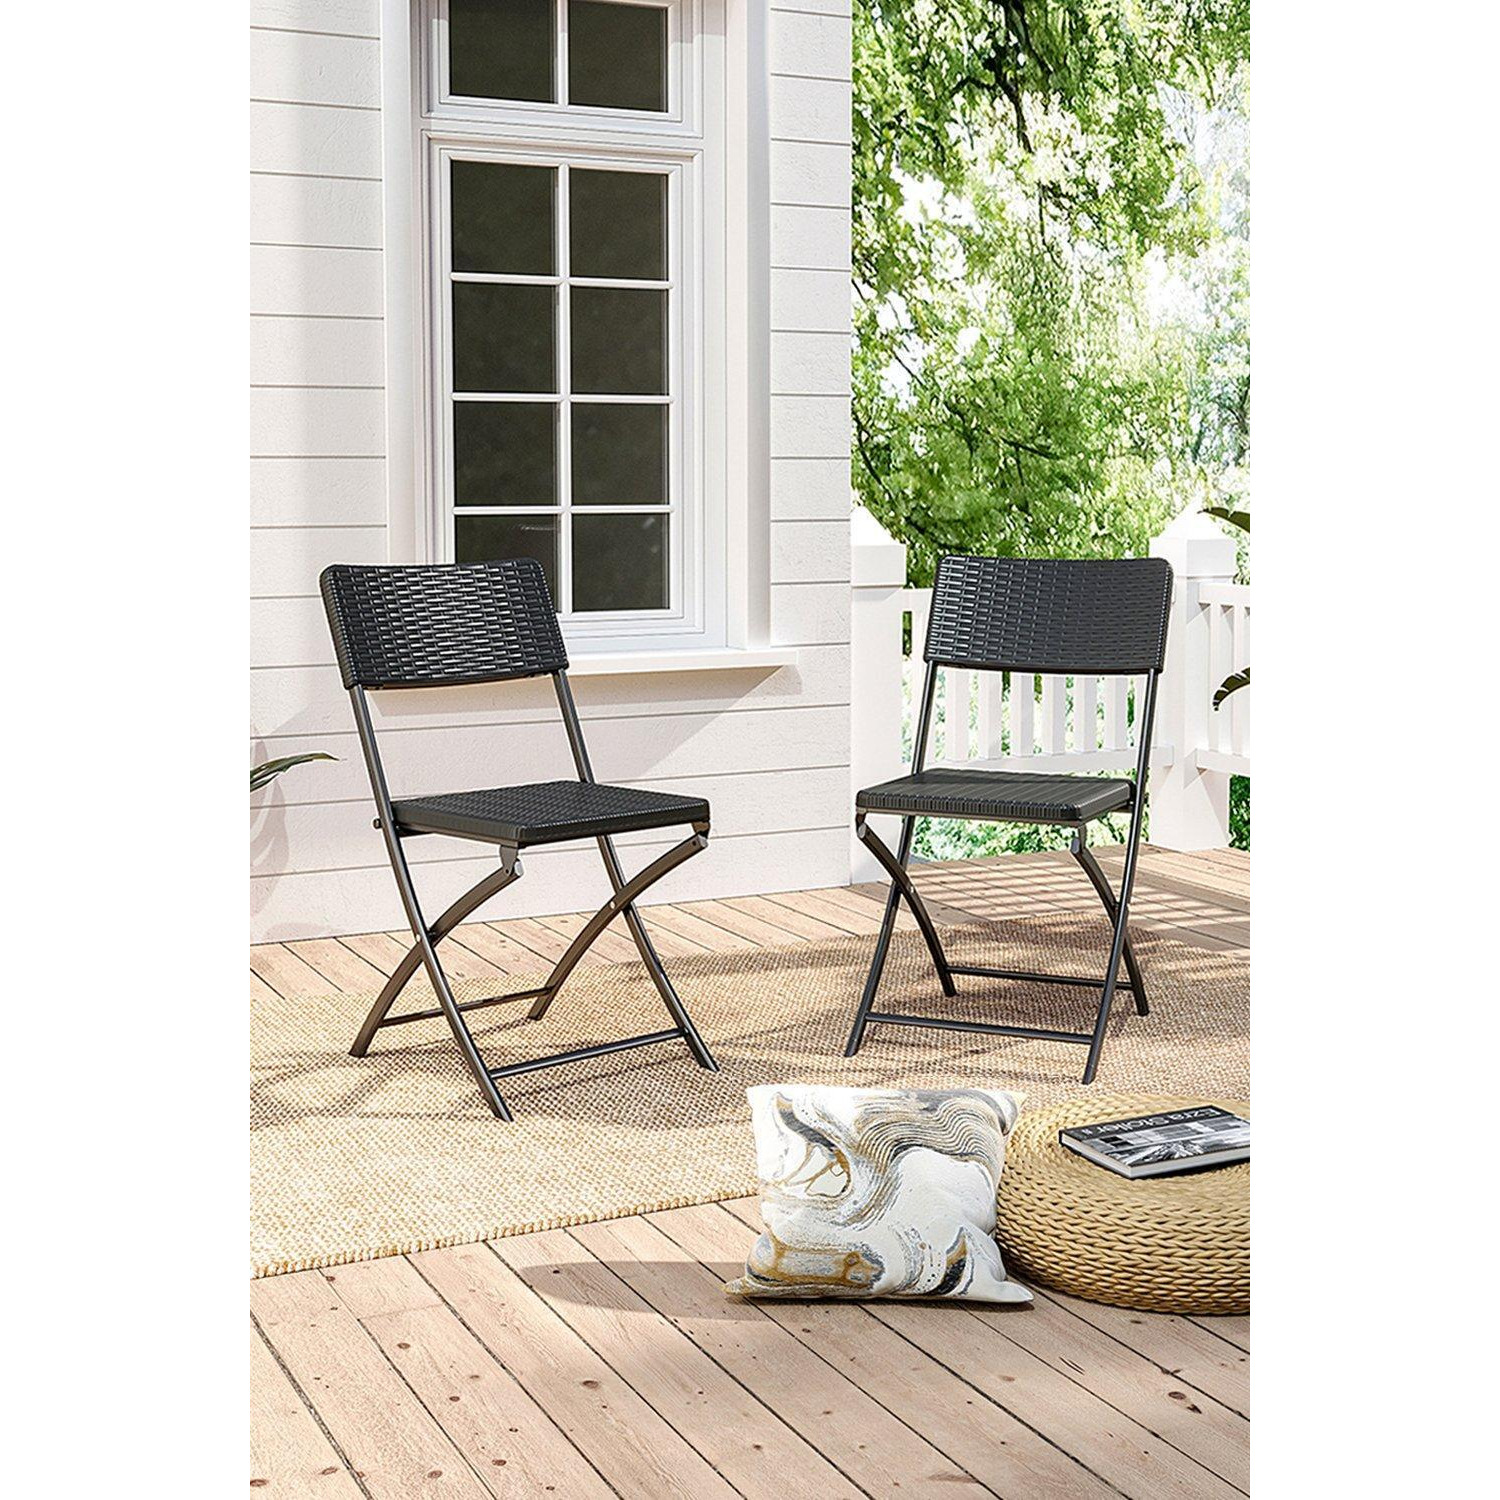 Set of 2 Outdoor Rattan Plastic Folding Chairs - image 1